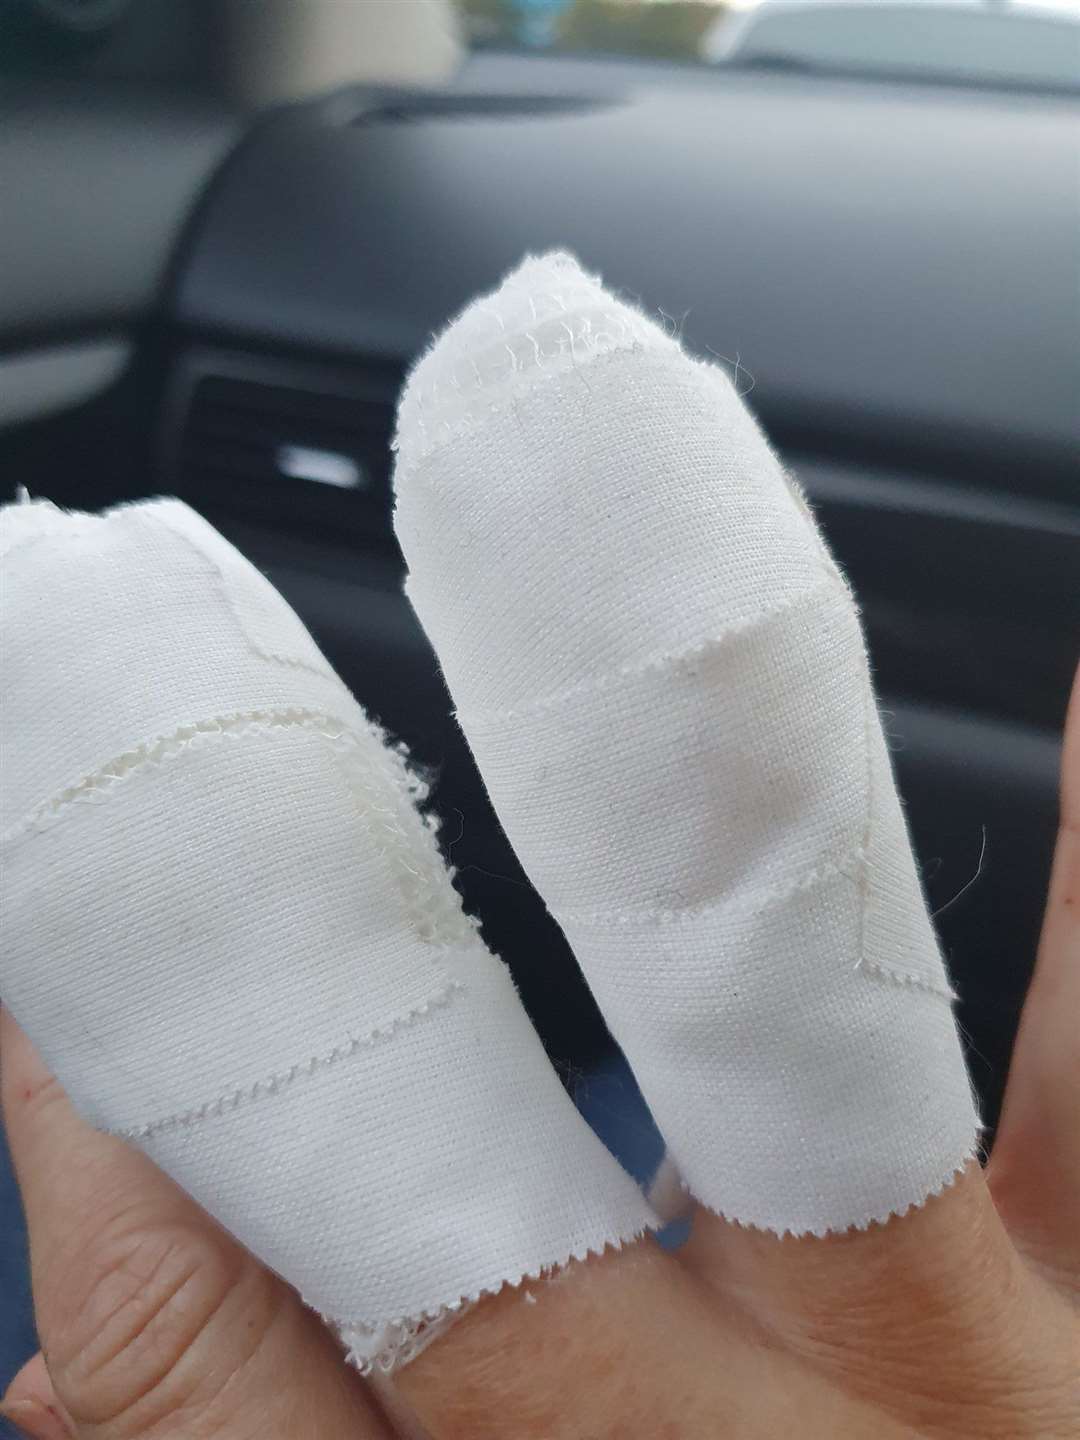 Cllr Carnac shared a pic of her bandaged up fingers. Picture: Rachel Carnac/Twitter